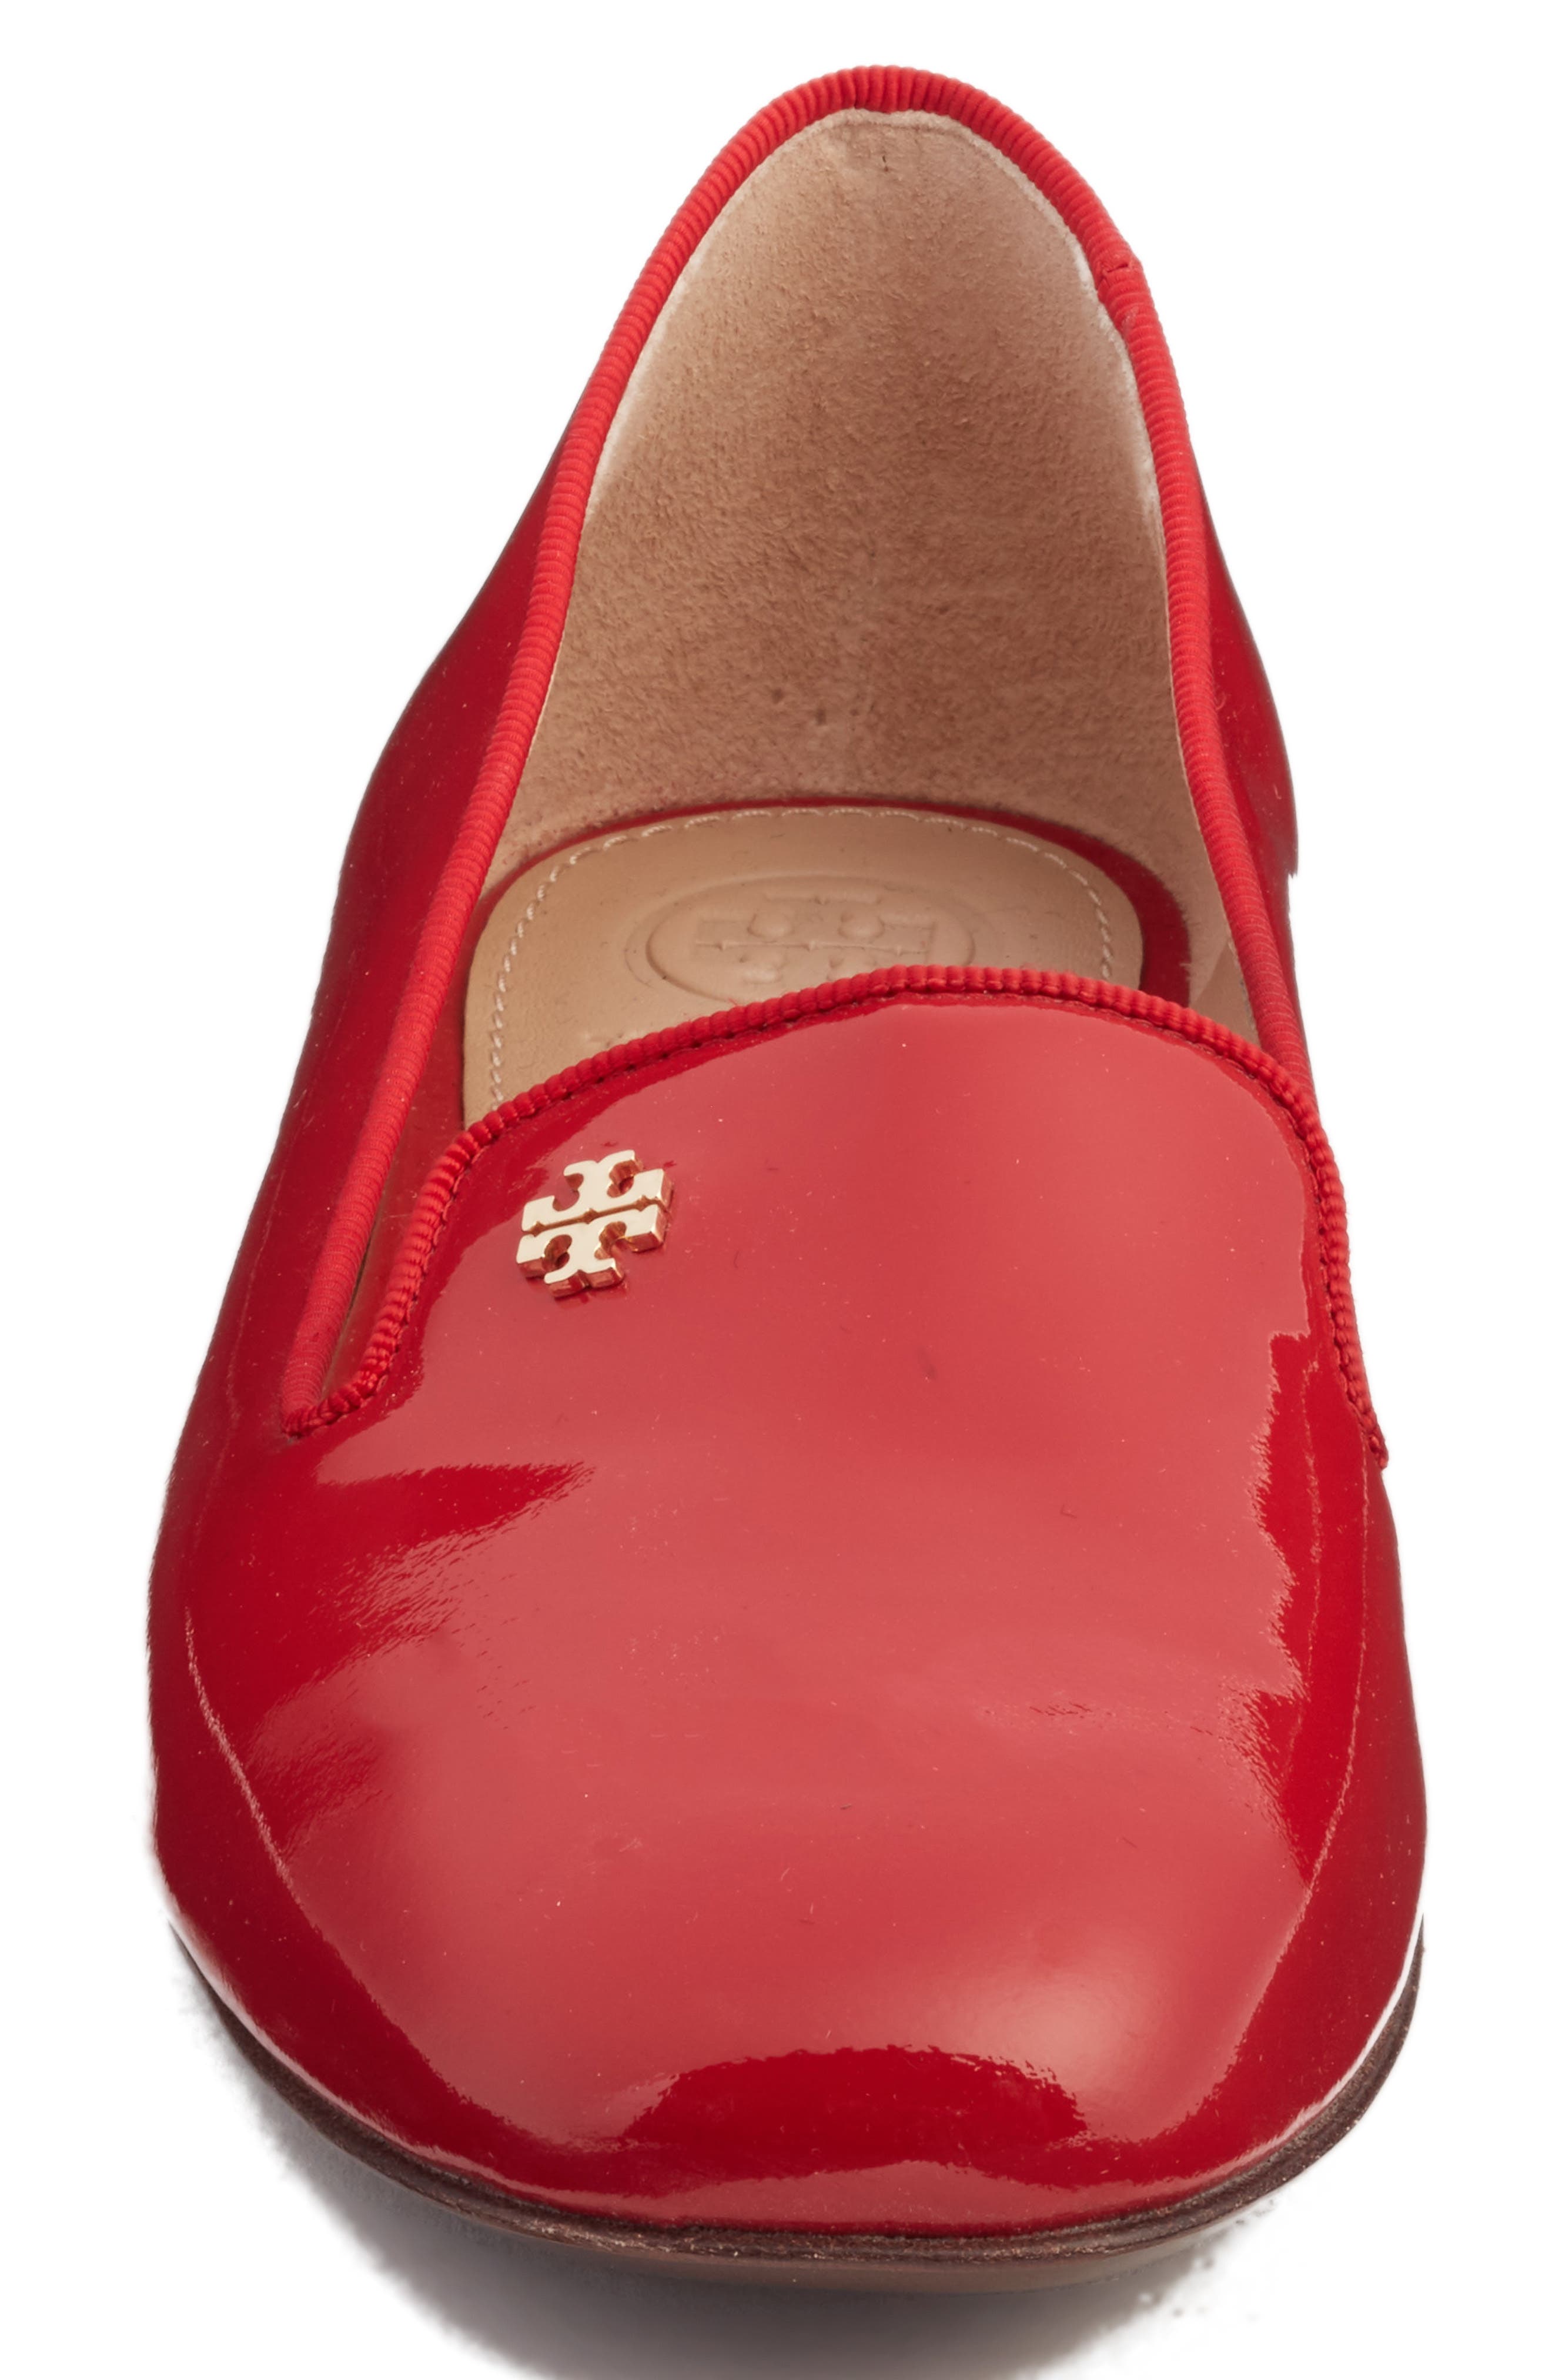 tory burch loafers nordstrom